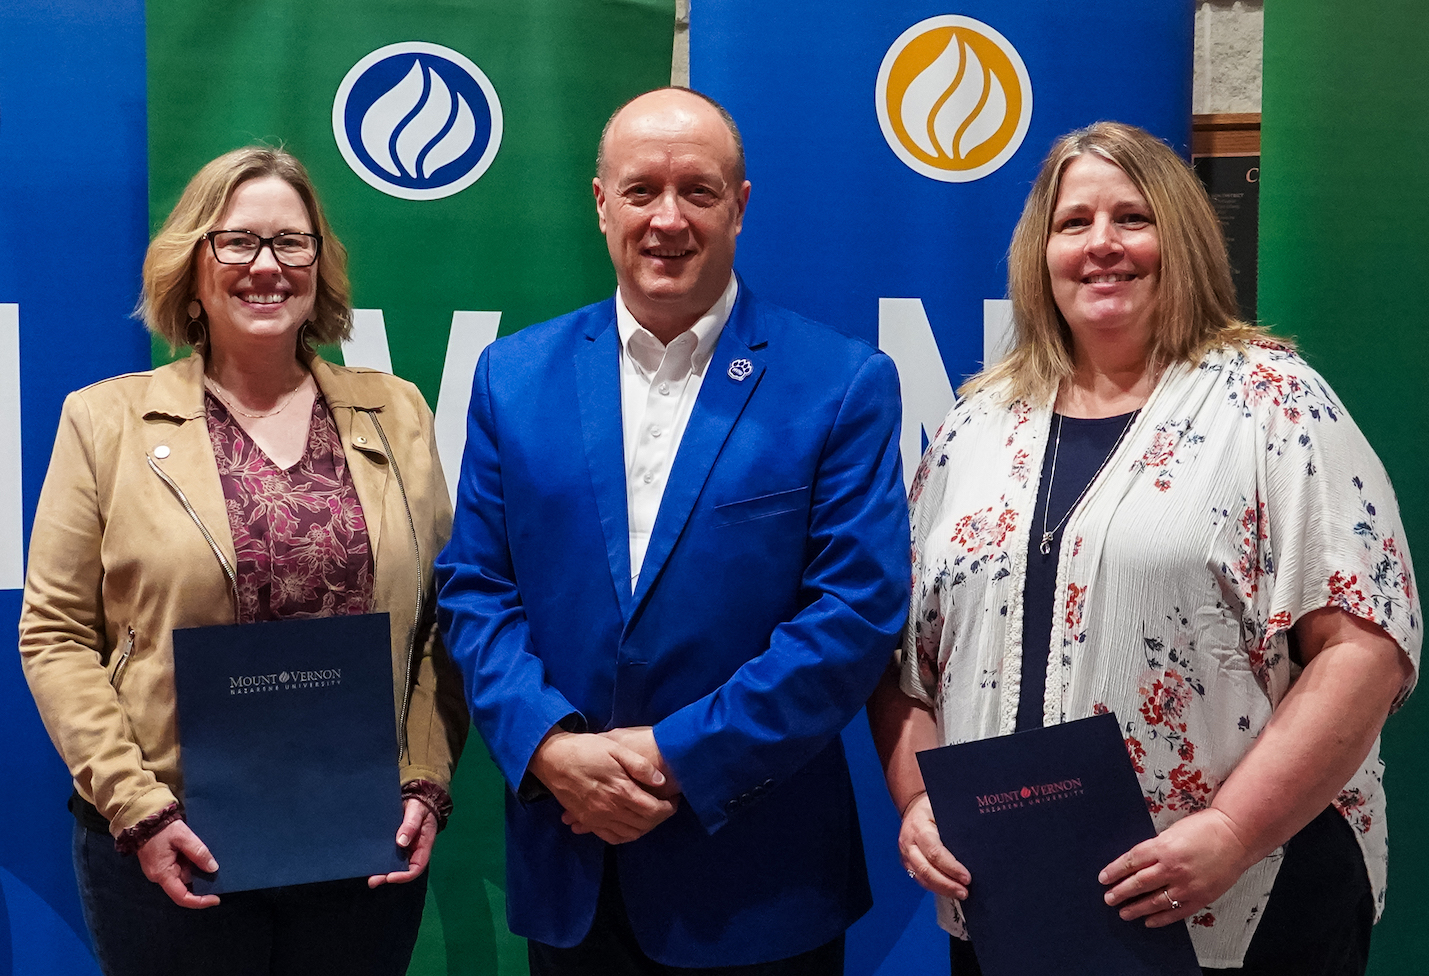 Mount Vernon Nazarene University President Dr. Carson Castleman, center, congratulates Excellence In the Call award recipients Dr. Carrie Beal, Biology Professor and Physical Sciences Department Chair, left; and Samantha Scoles, Communications Director, right.  